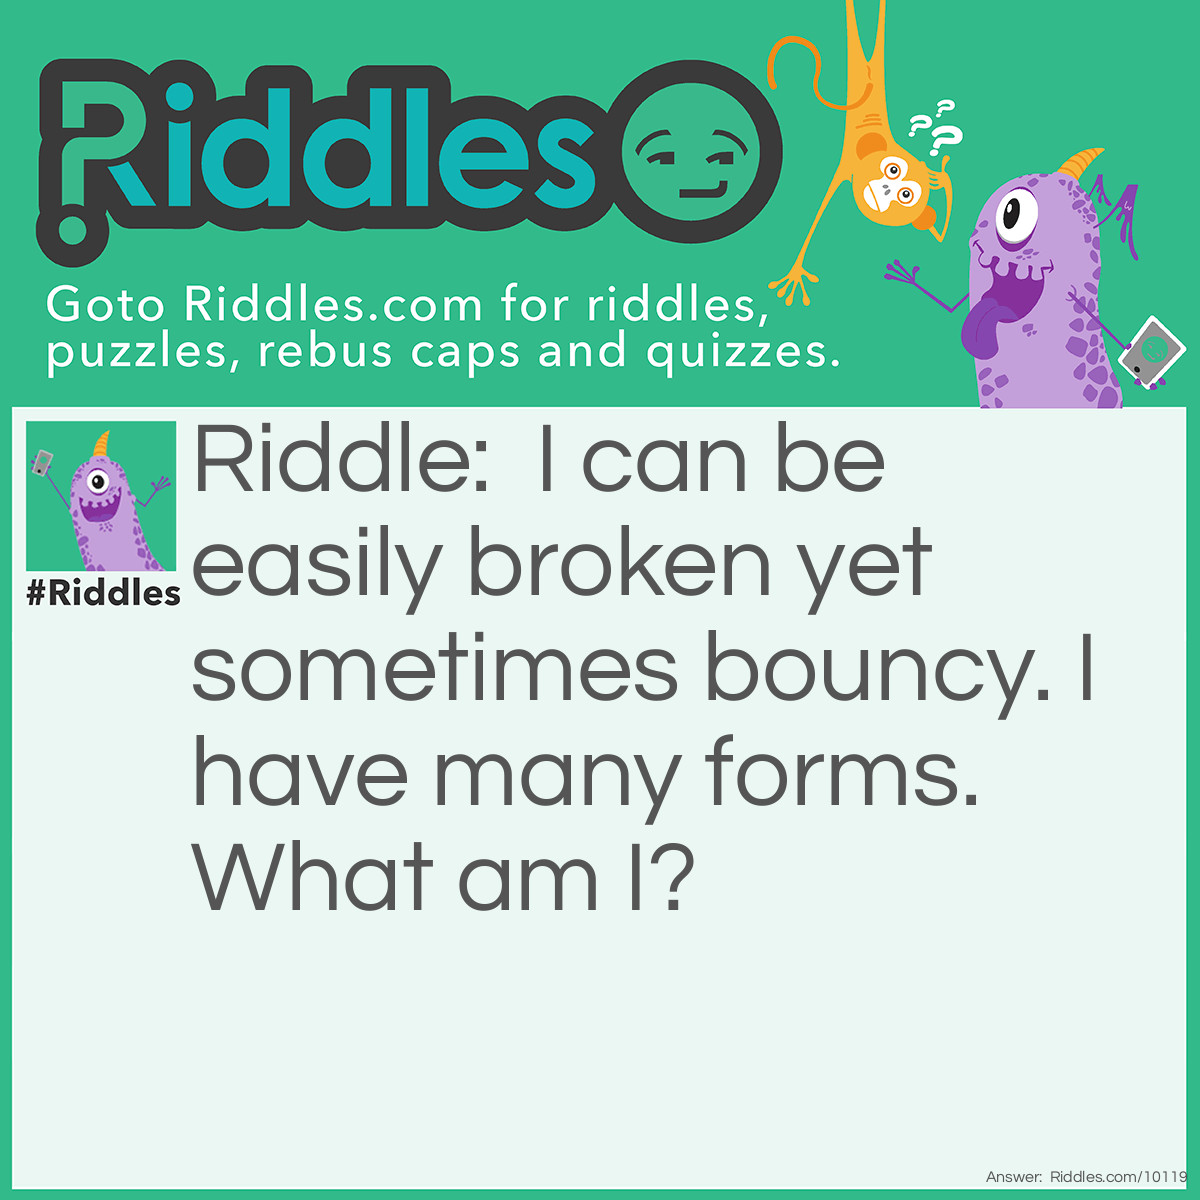 Riddle: I can be easily broken yet sometimes bouncy. I have many forms. What am I? Answer: Egg.